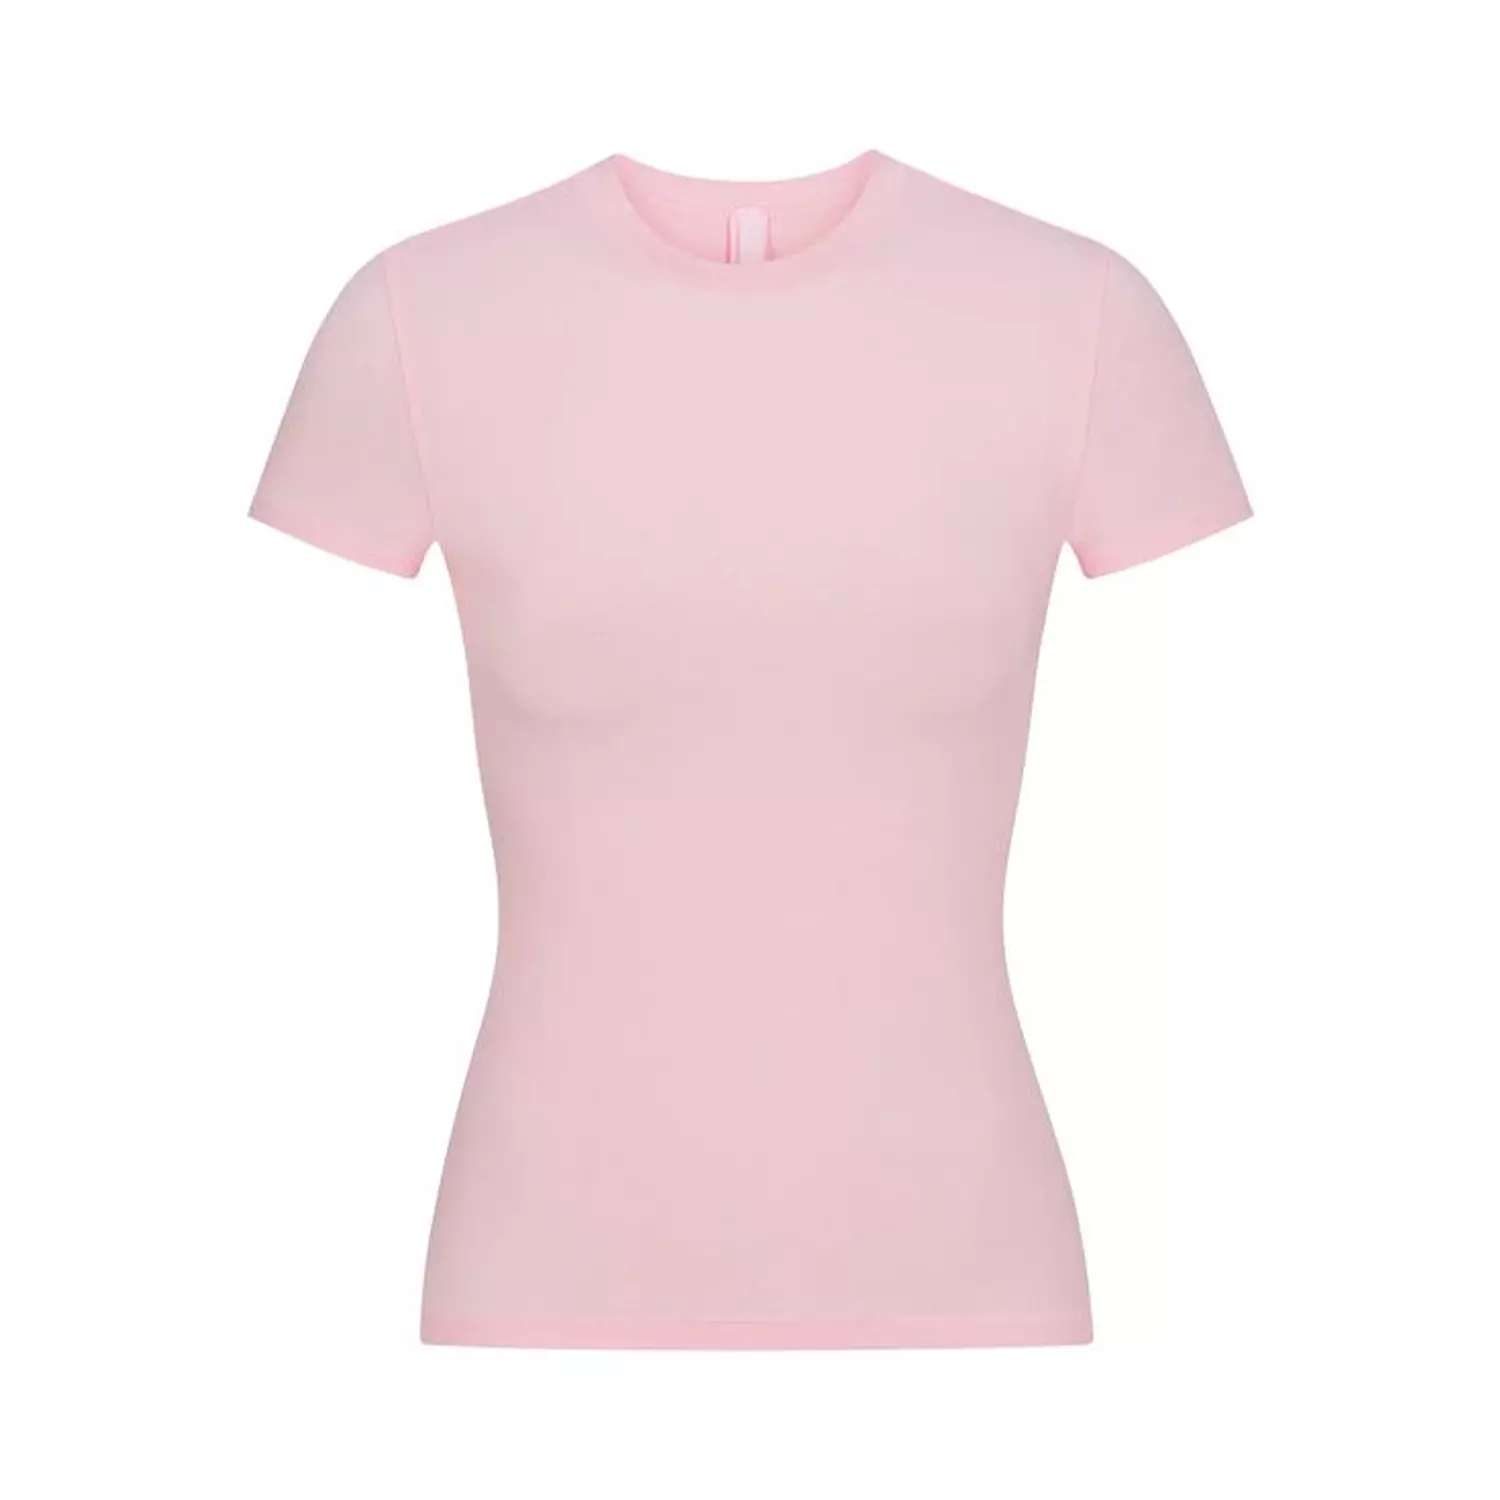 Baby Pink Basic Top  hover image